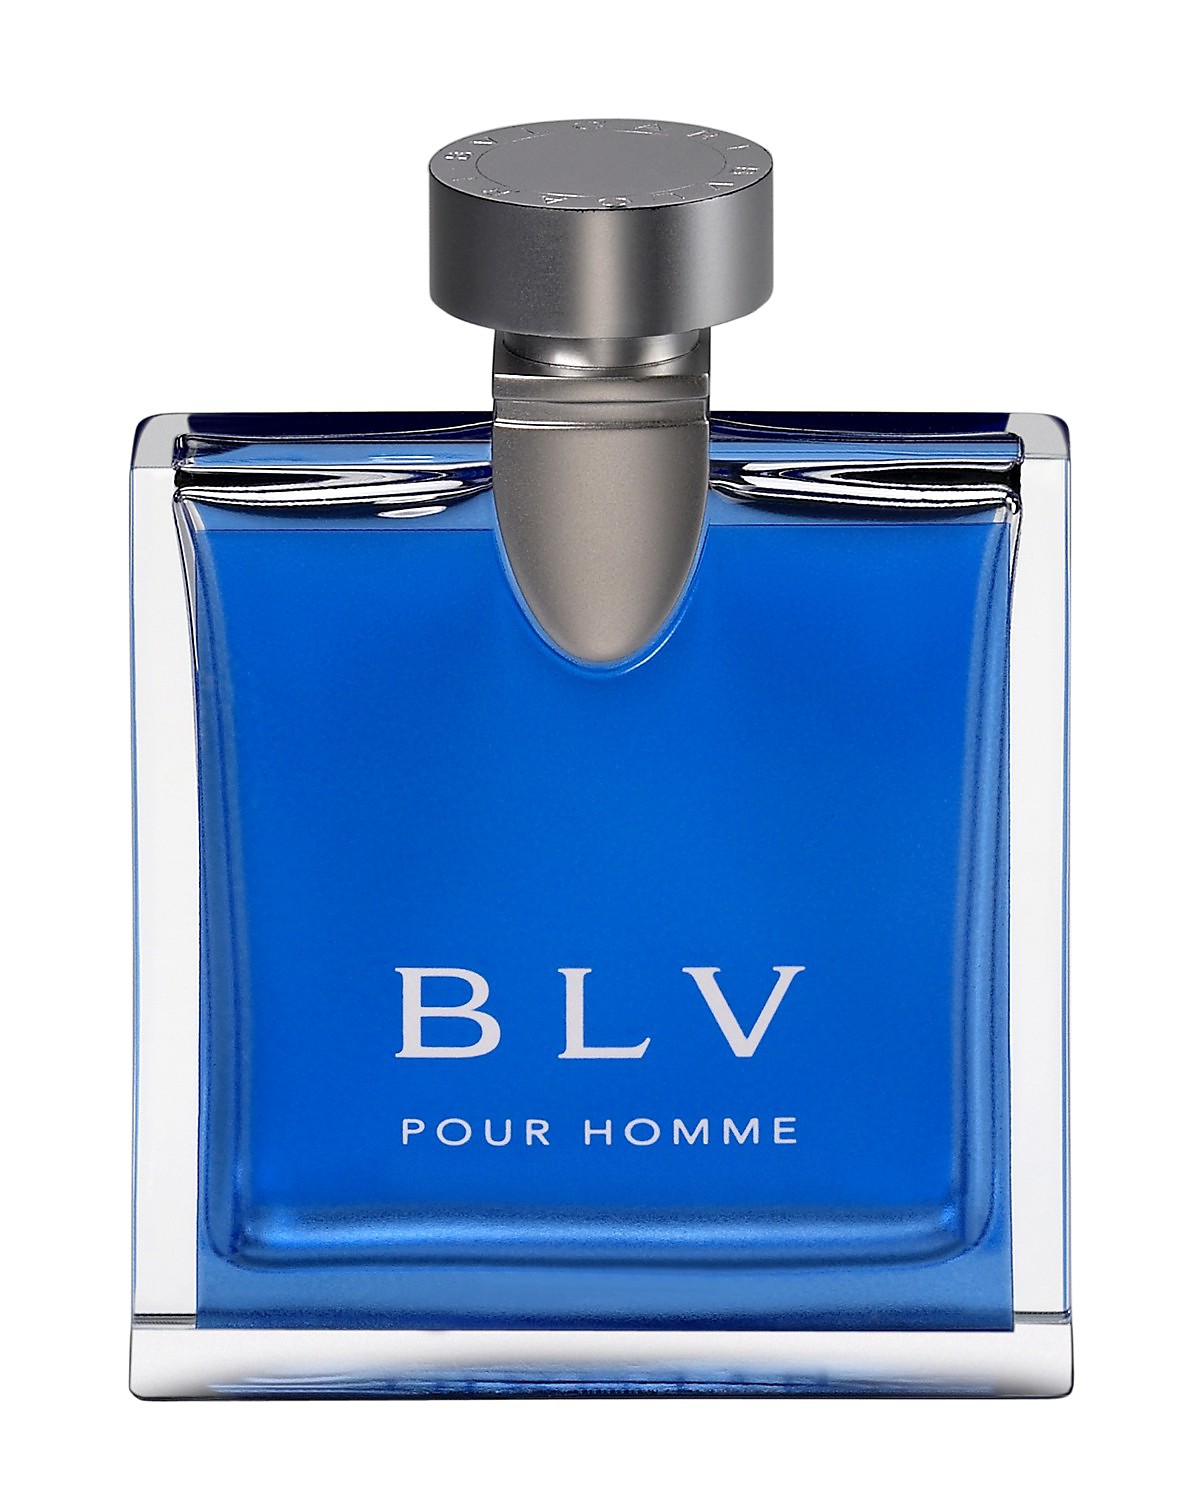 Bvlgari Blv Pour Homme review — Best 